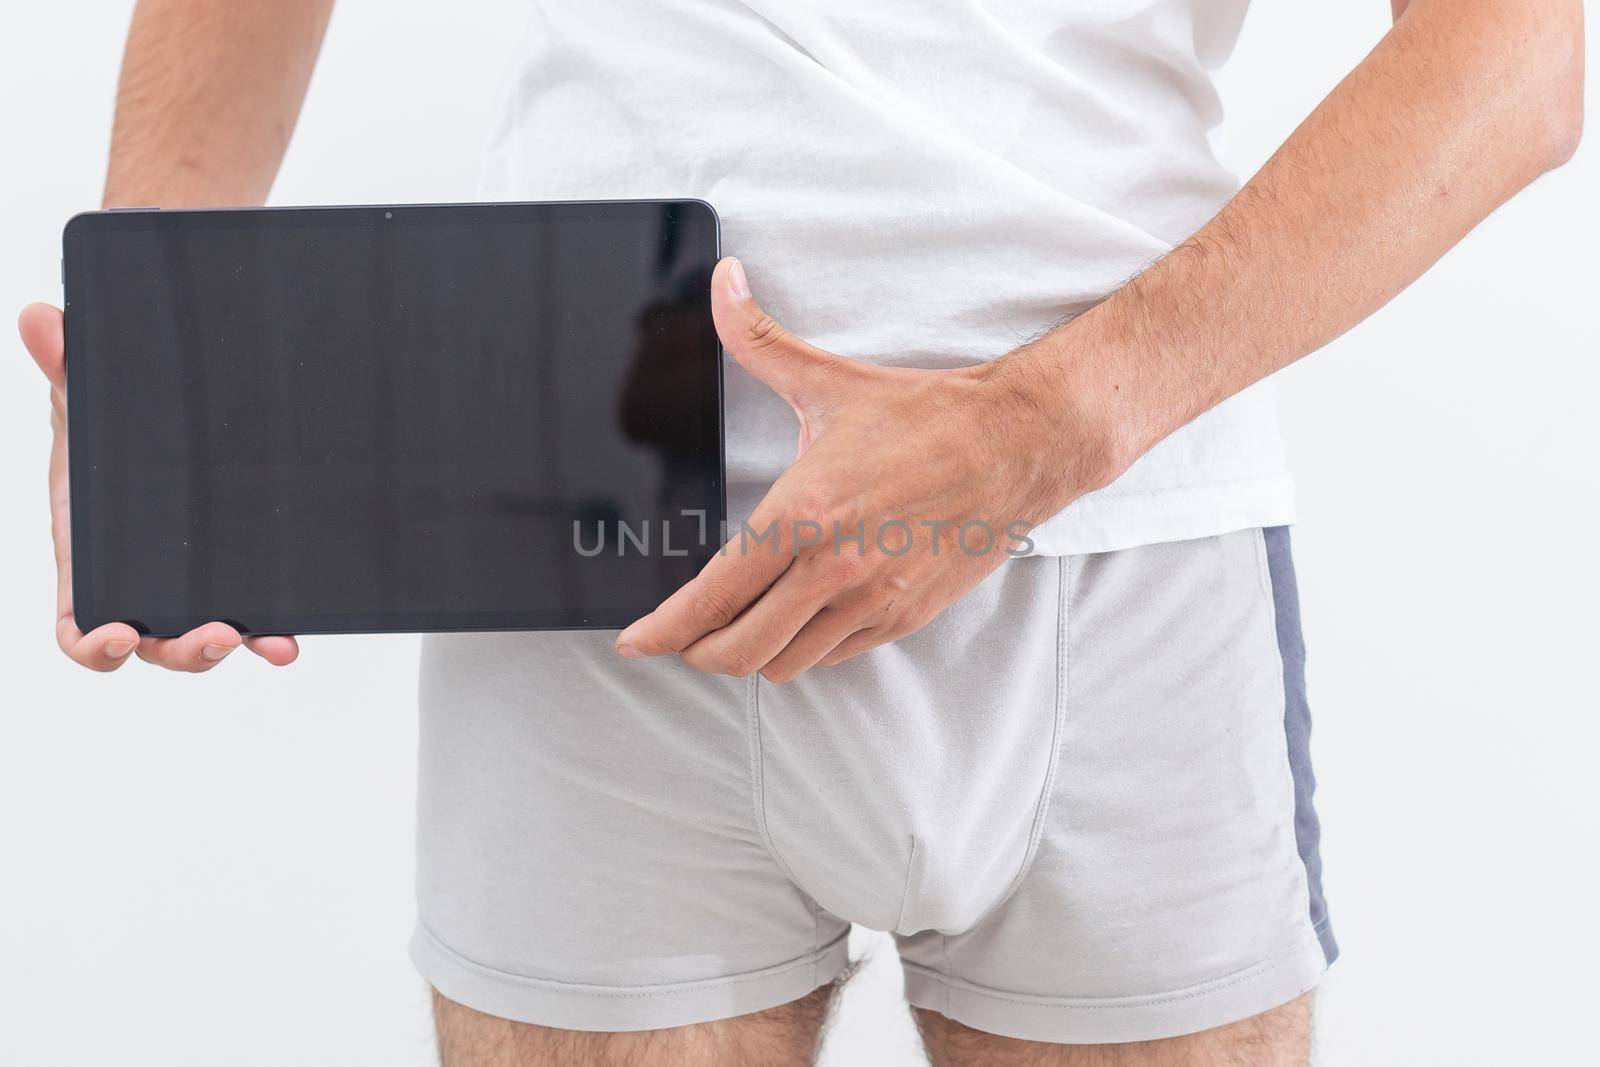 a man in underwear is holding a tablet.